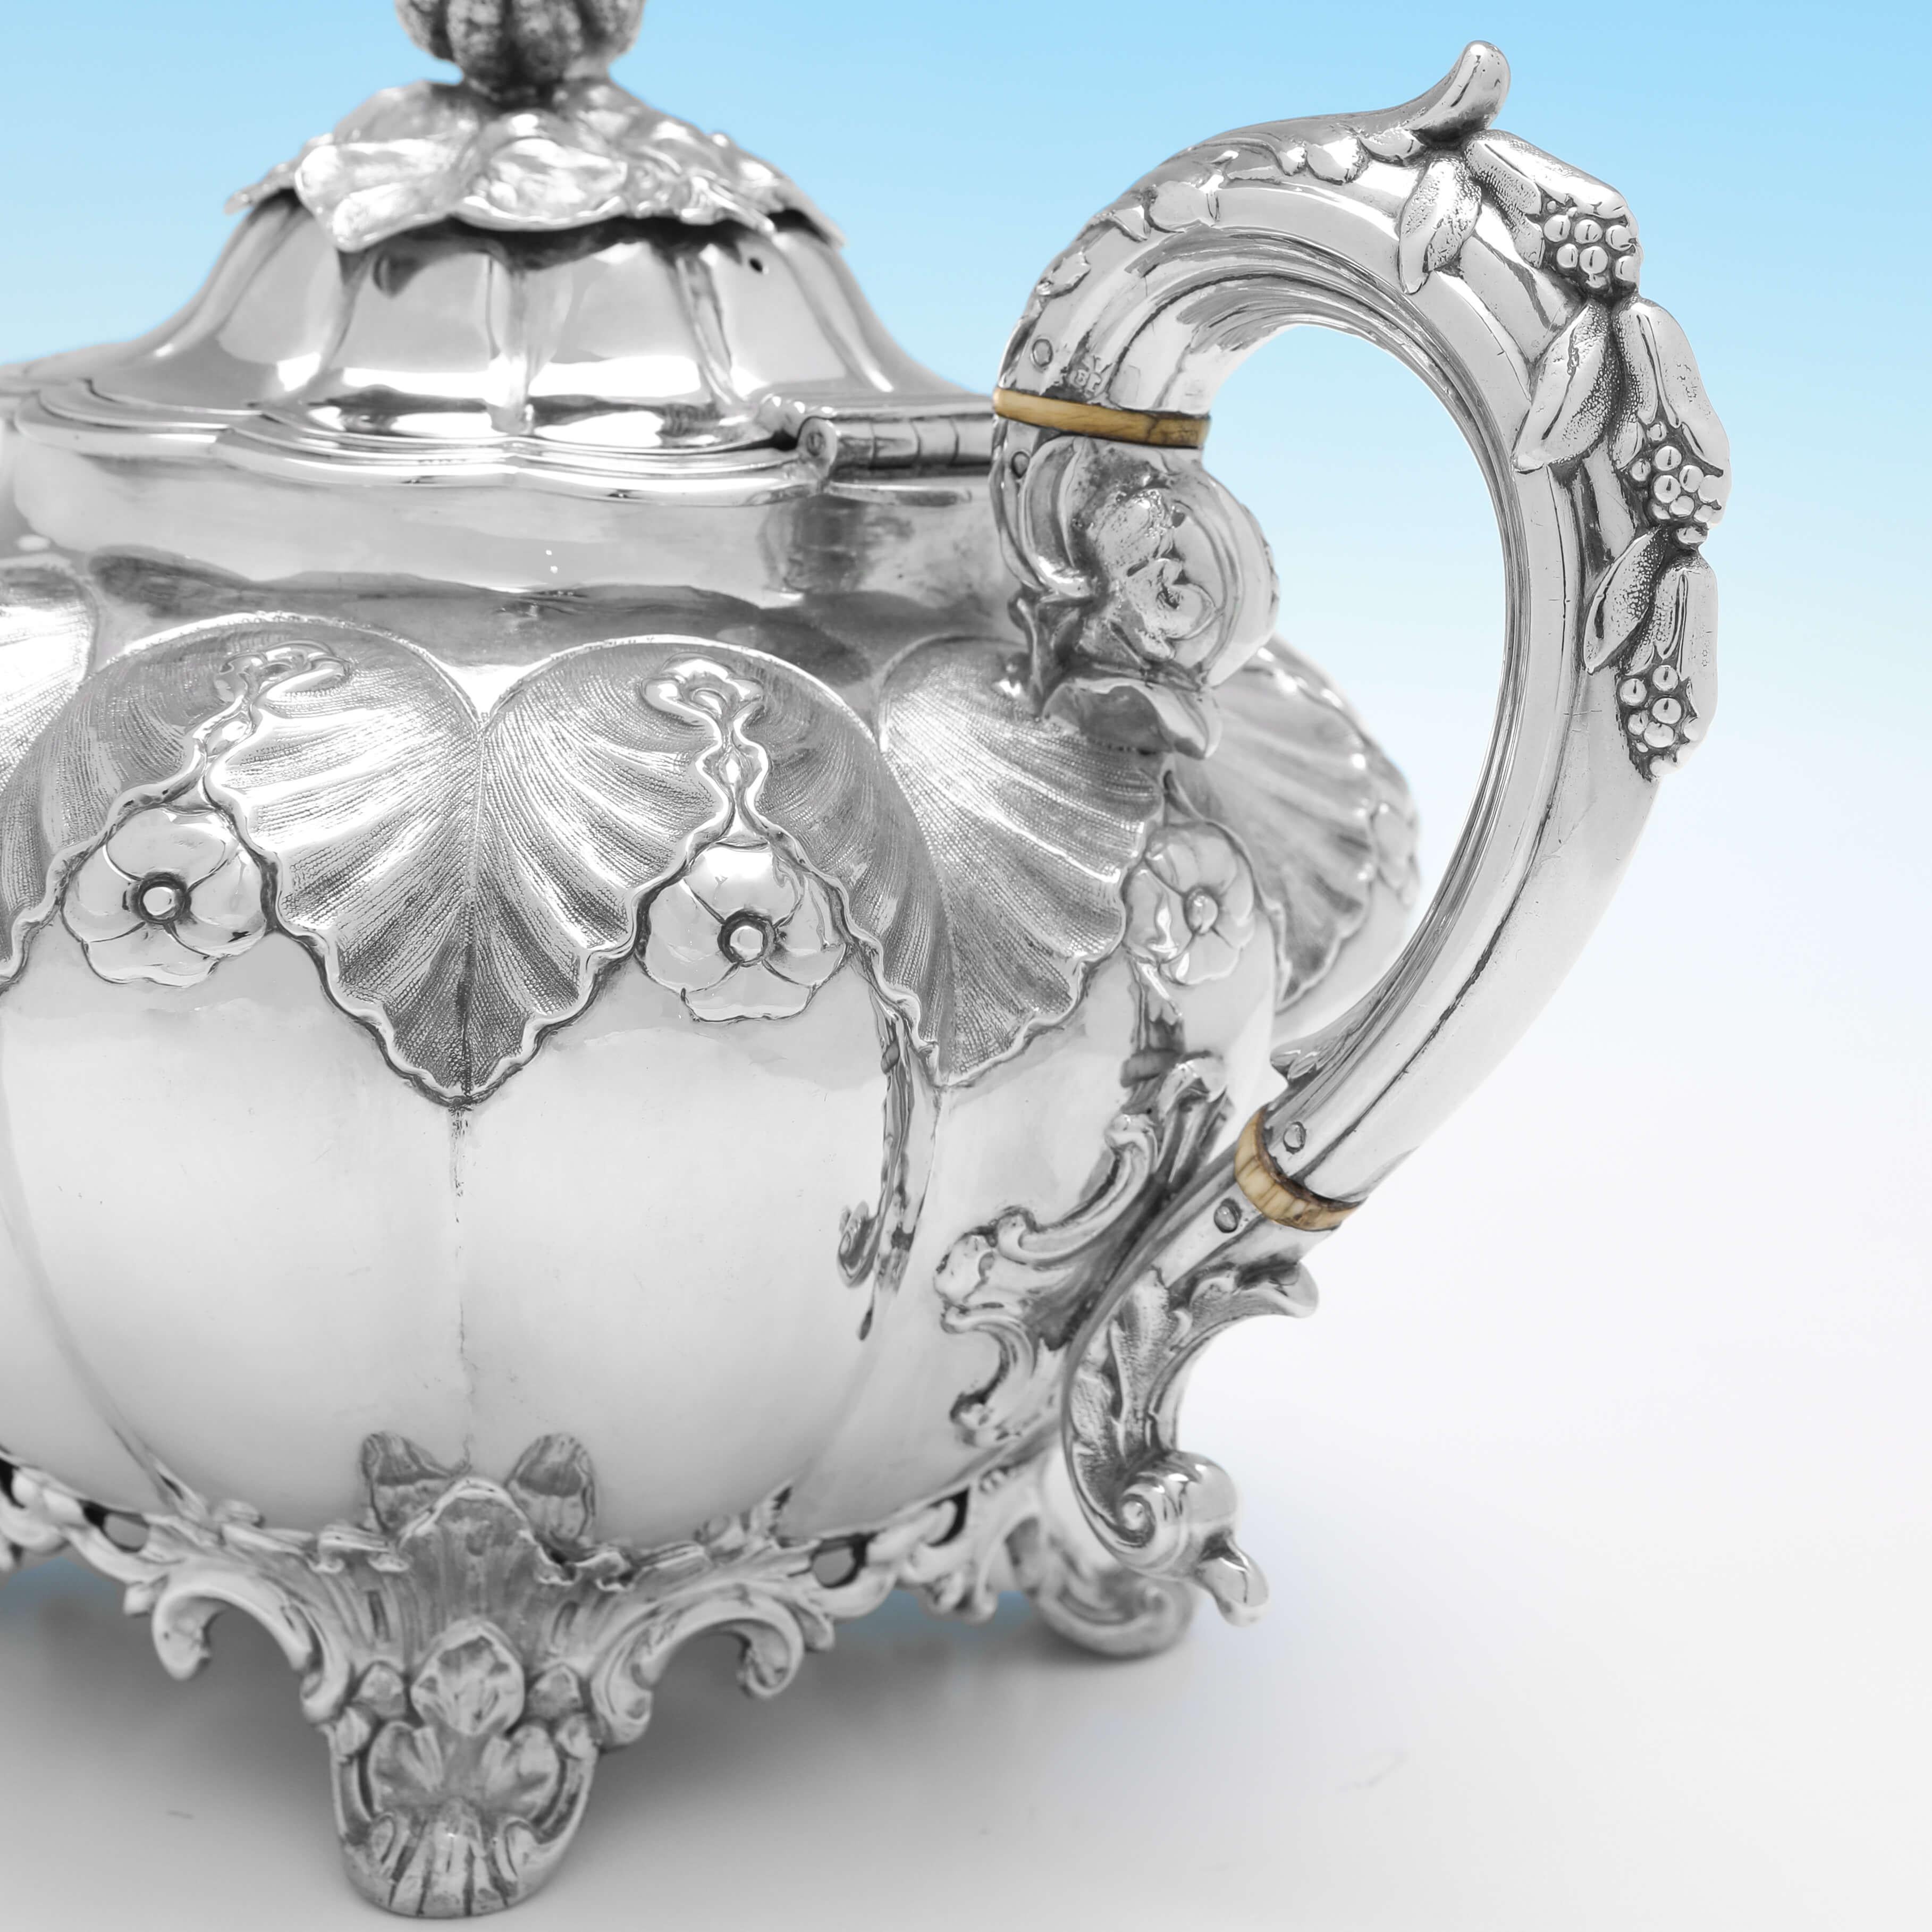 Melon Shaped Victorian Antique Sterling Silver Tea & Coffee Set - London 1851 For Sale 1